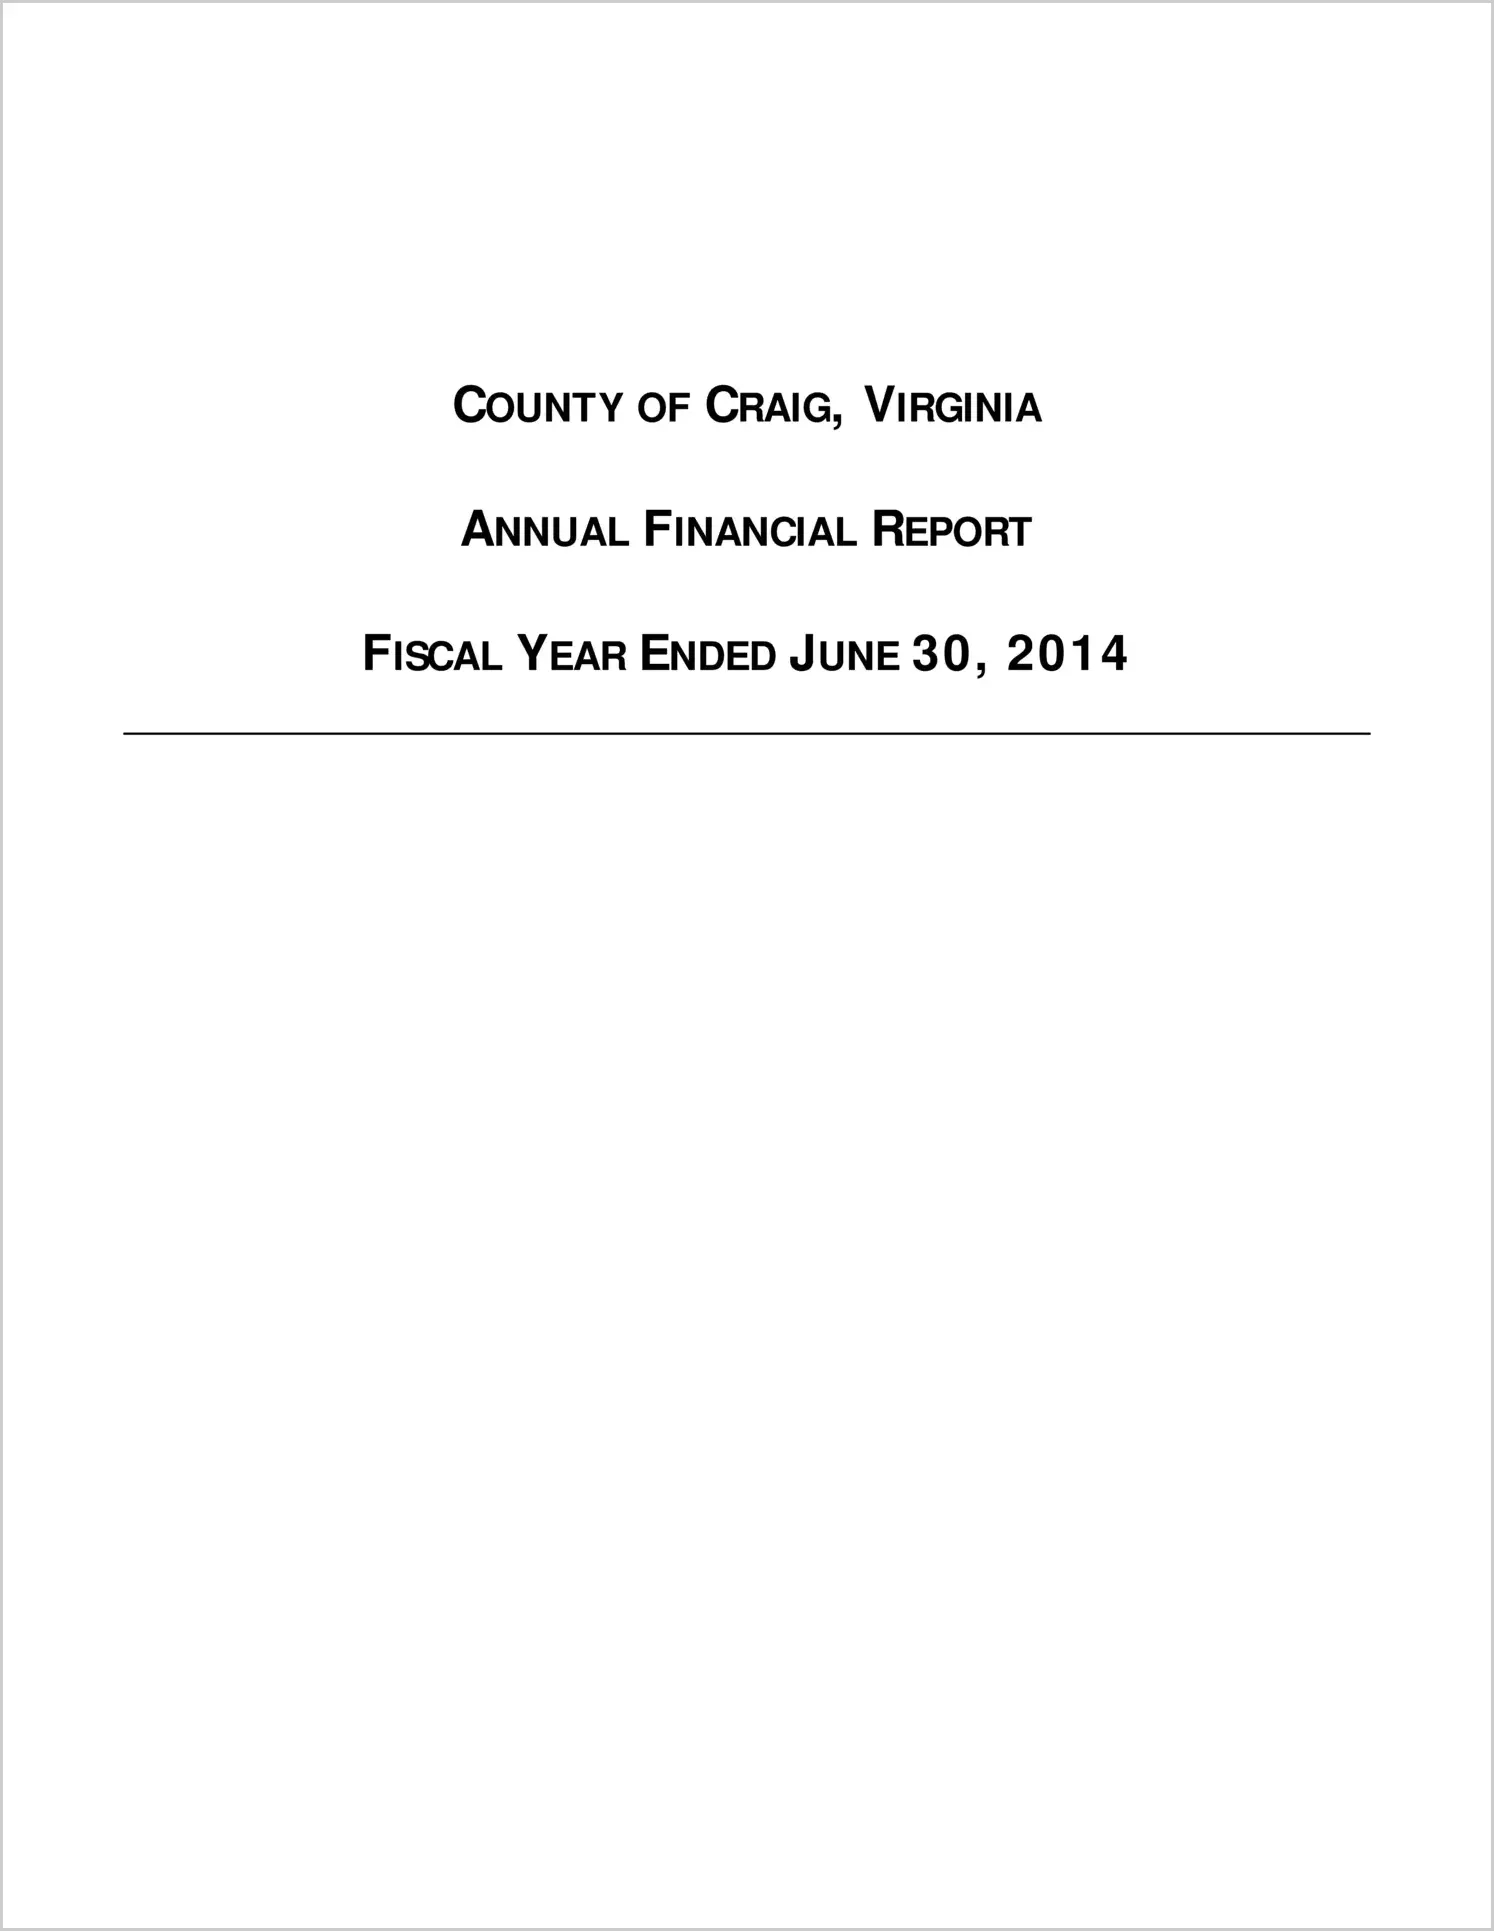 2014 Annual Financial Report for County of Craig